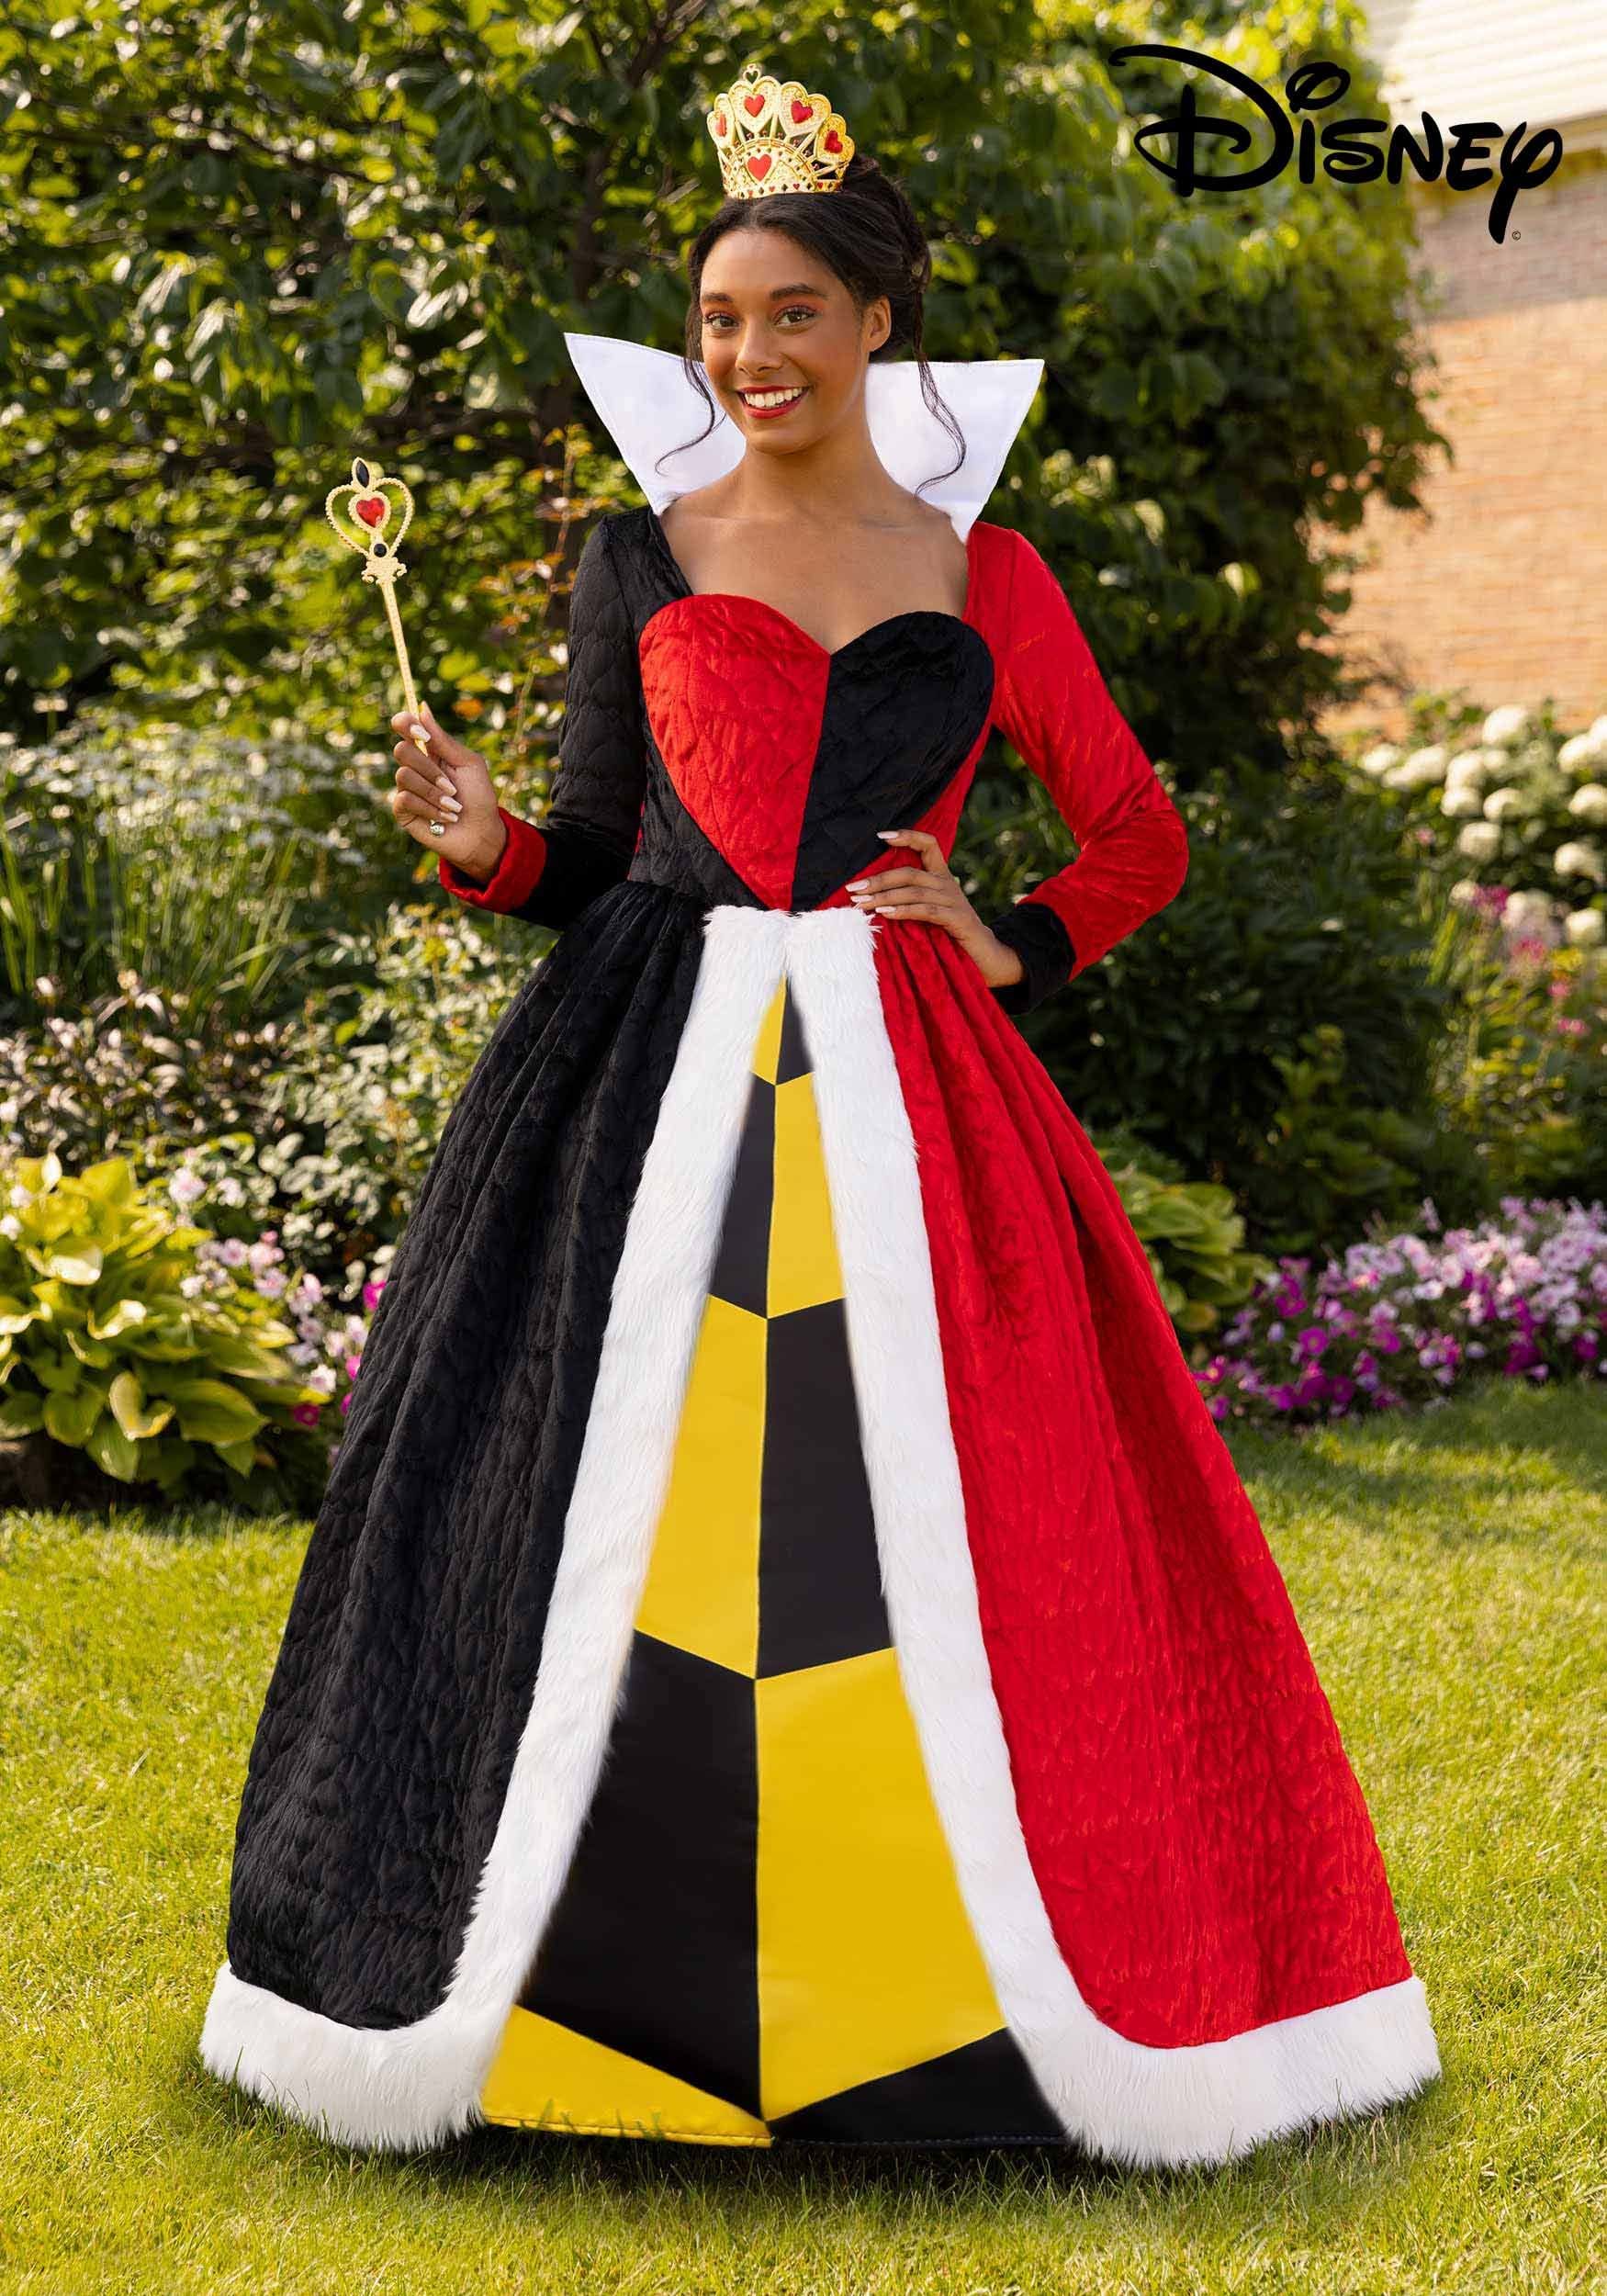 https://images.halloweencostumes.ca/products/86105/1-1/adult-authentic-disney-queen-of-hearts-costume.jpg